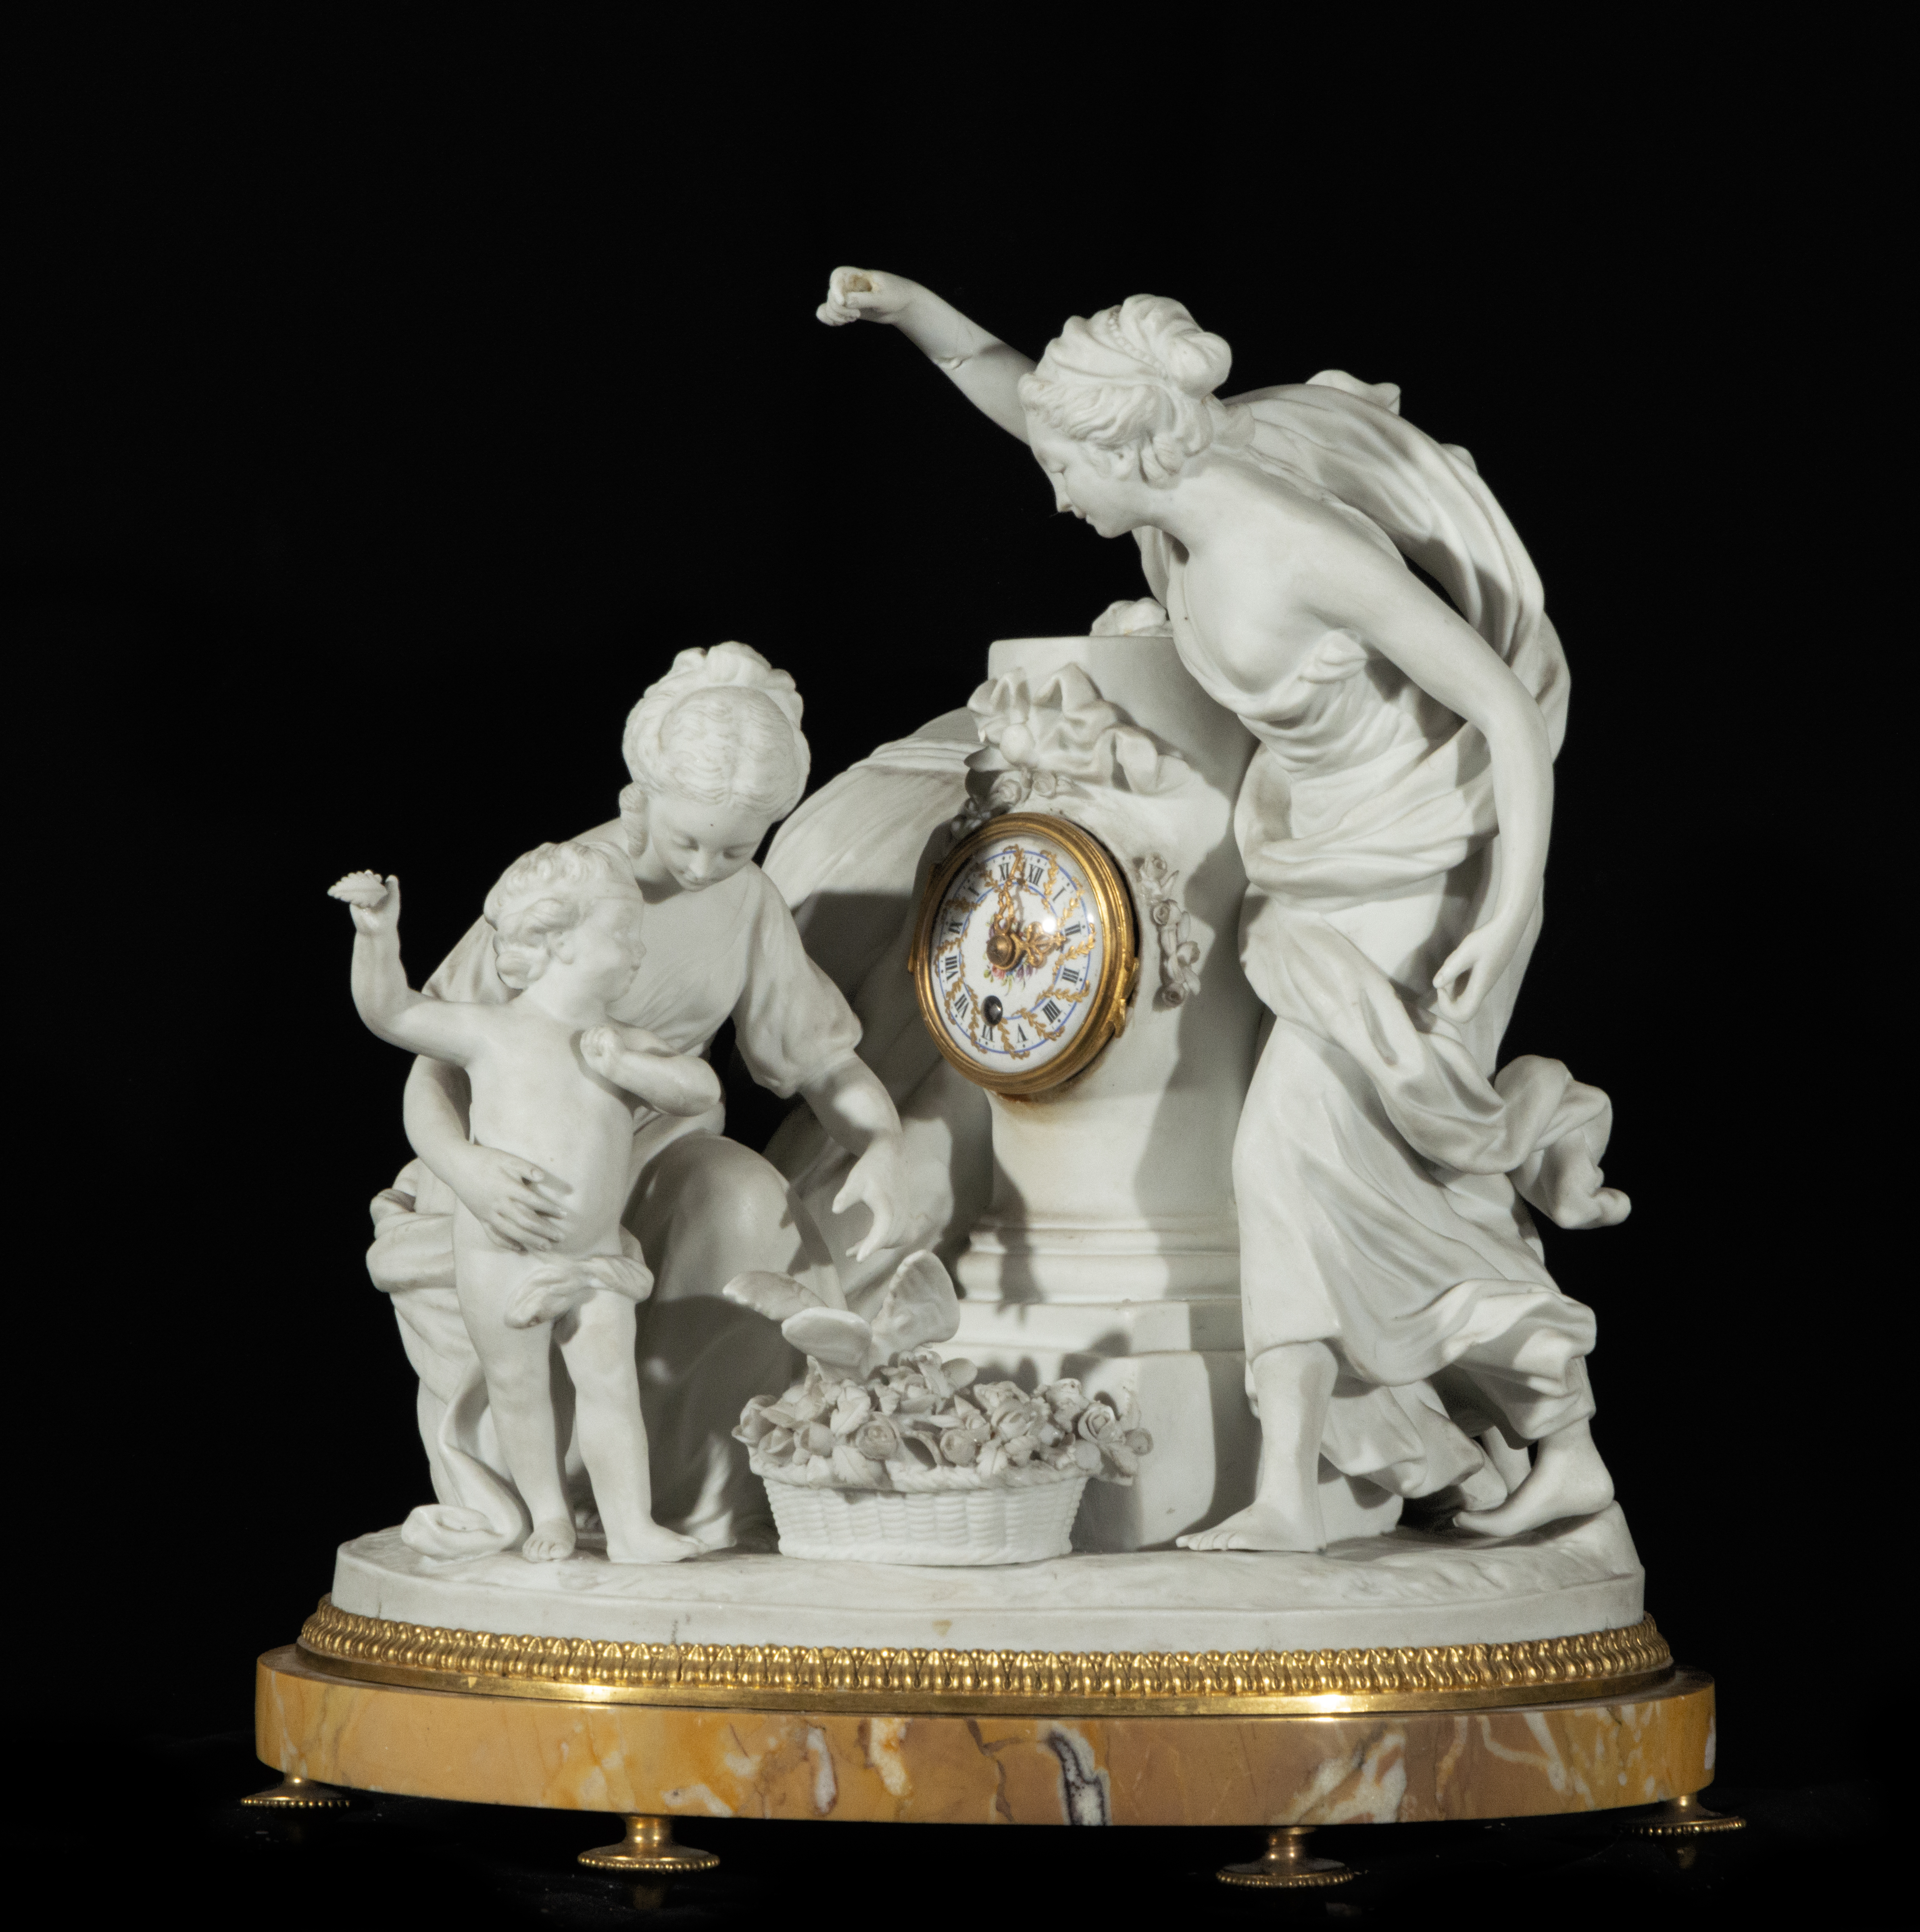 Elegant Louis XVI table clock in Siena marble, gilt bronze, and biscuit porcelain from Sèvres, late 